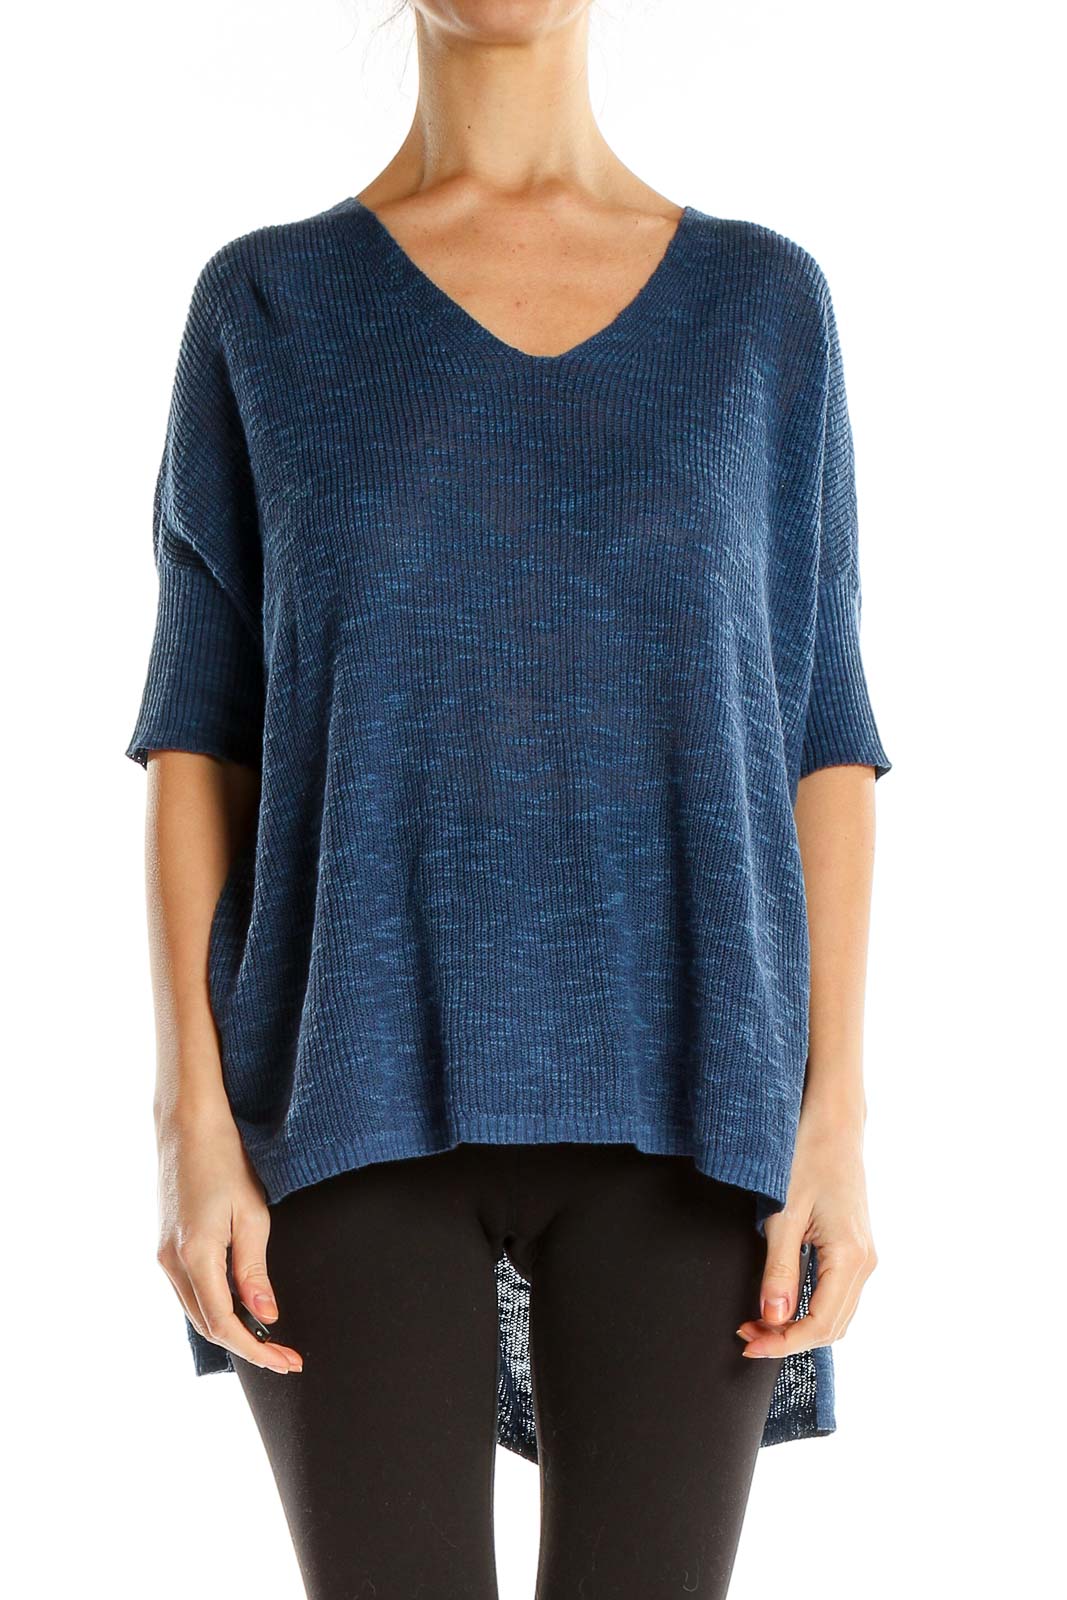 Blue Heathered All Day Wear Top Front